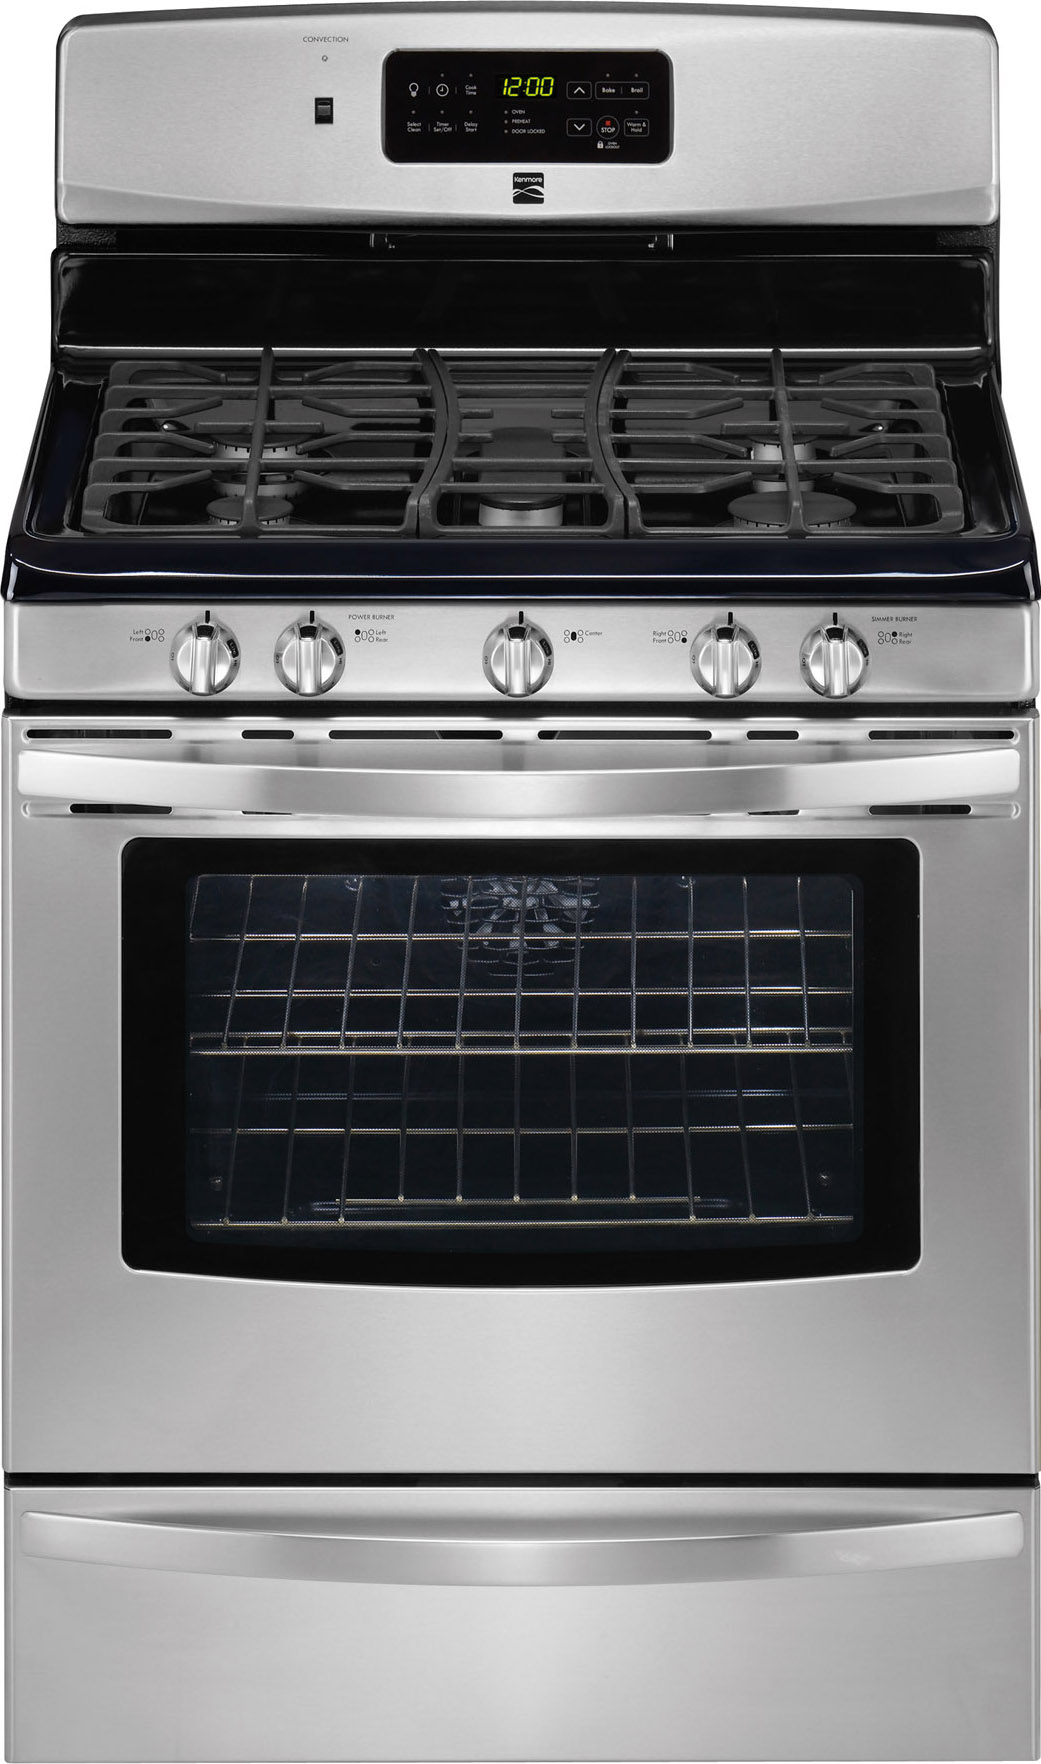 How To Fix A Kenmore Range Stove Oven Range Stove Oven Troubleshooting